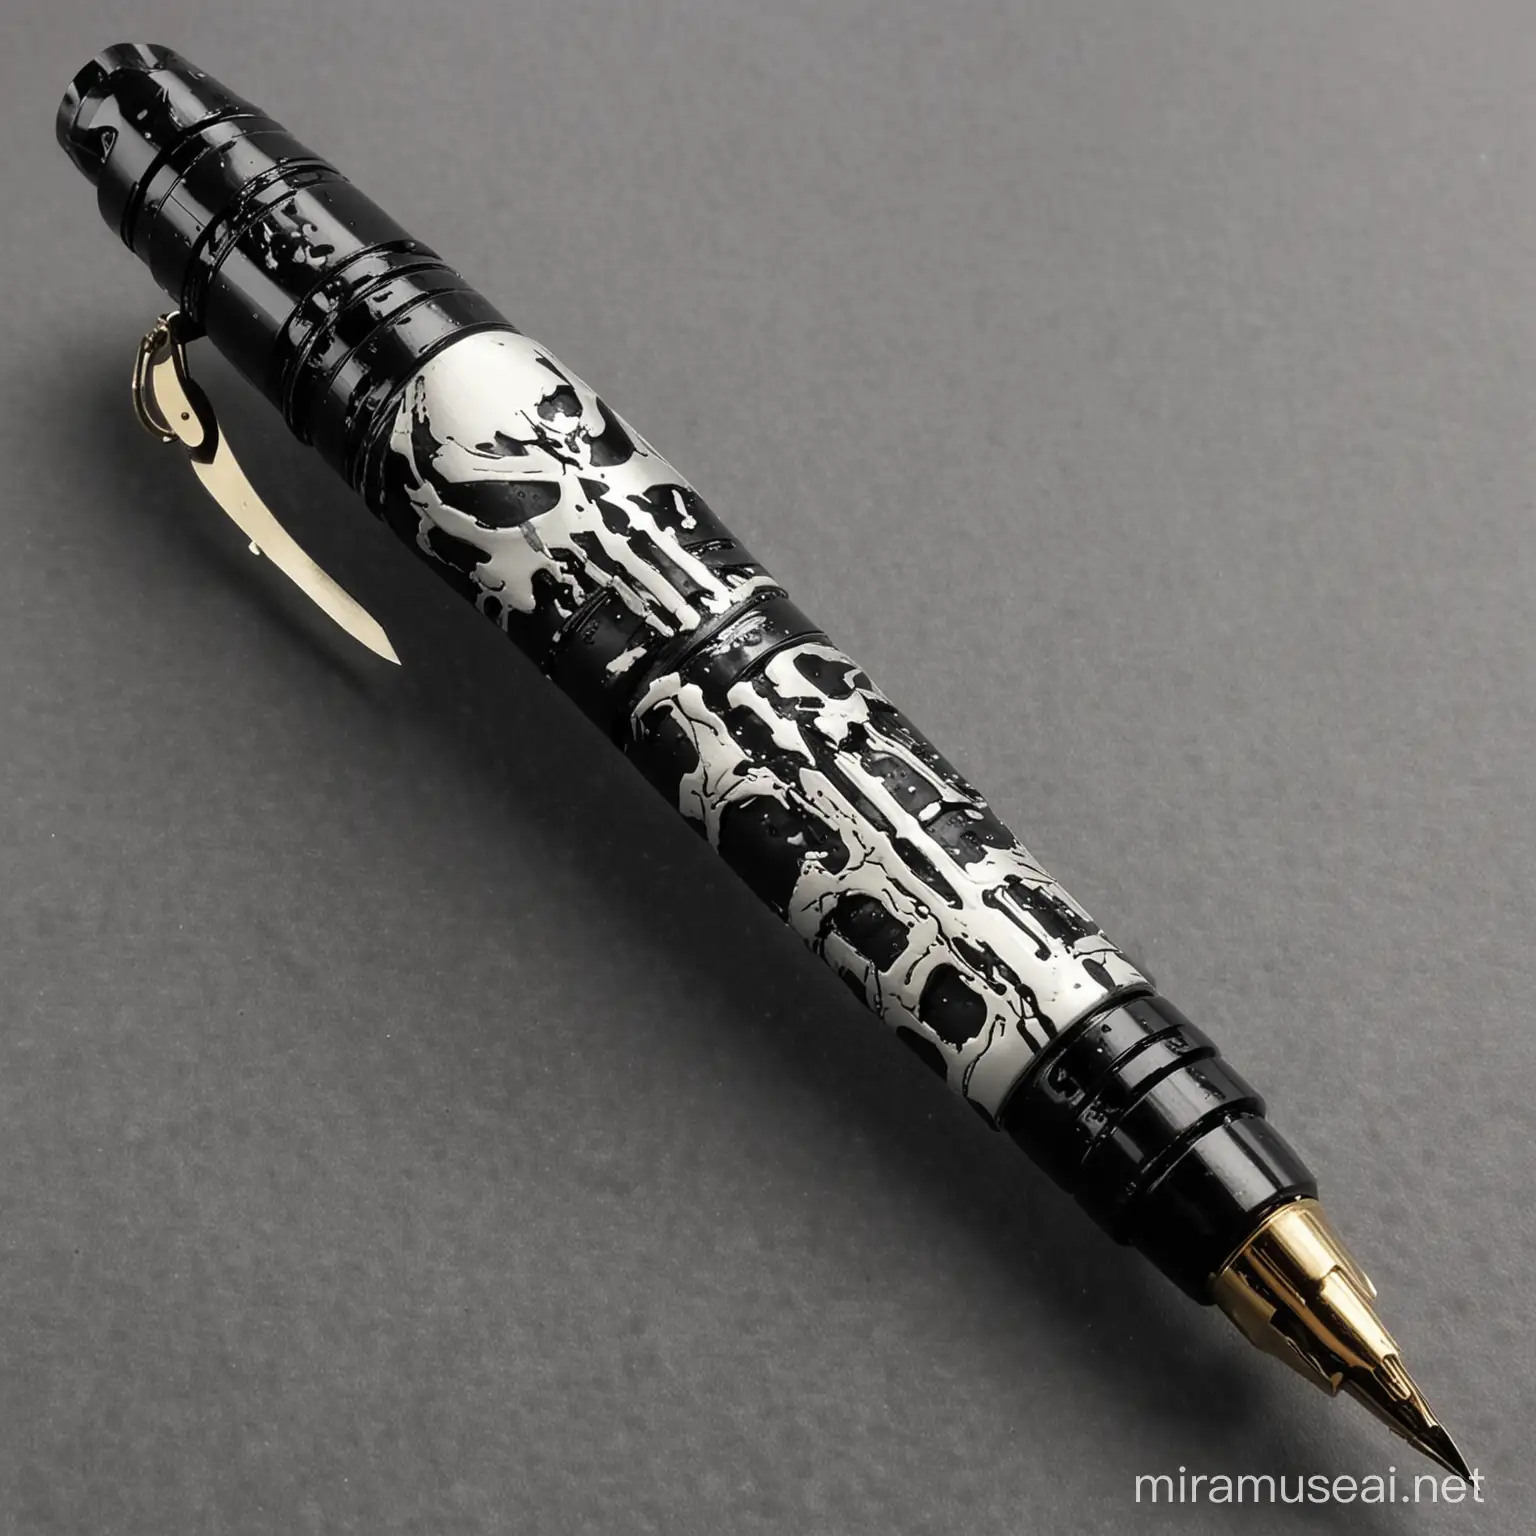 The Punisher Style Fountain Pen